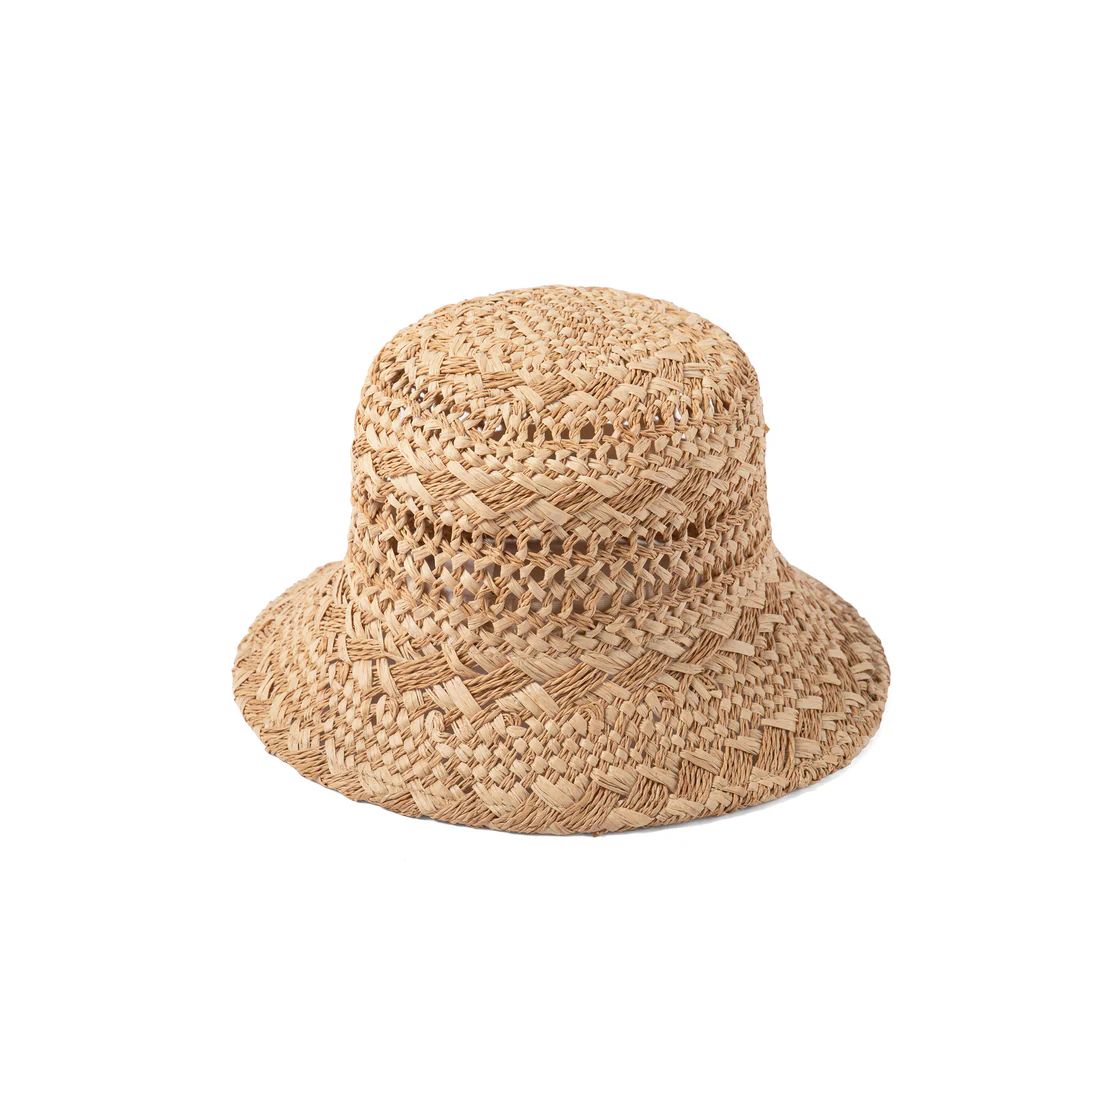 The Inca Bucket - Straw Bucket Hat in Brown | Lack of Color US | Lack of Color